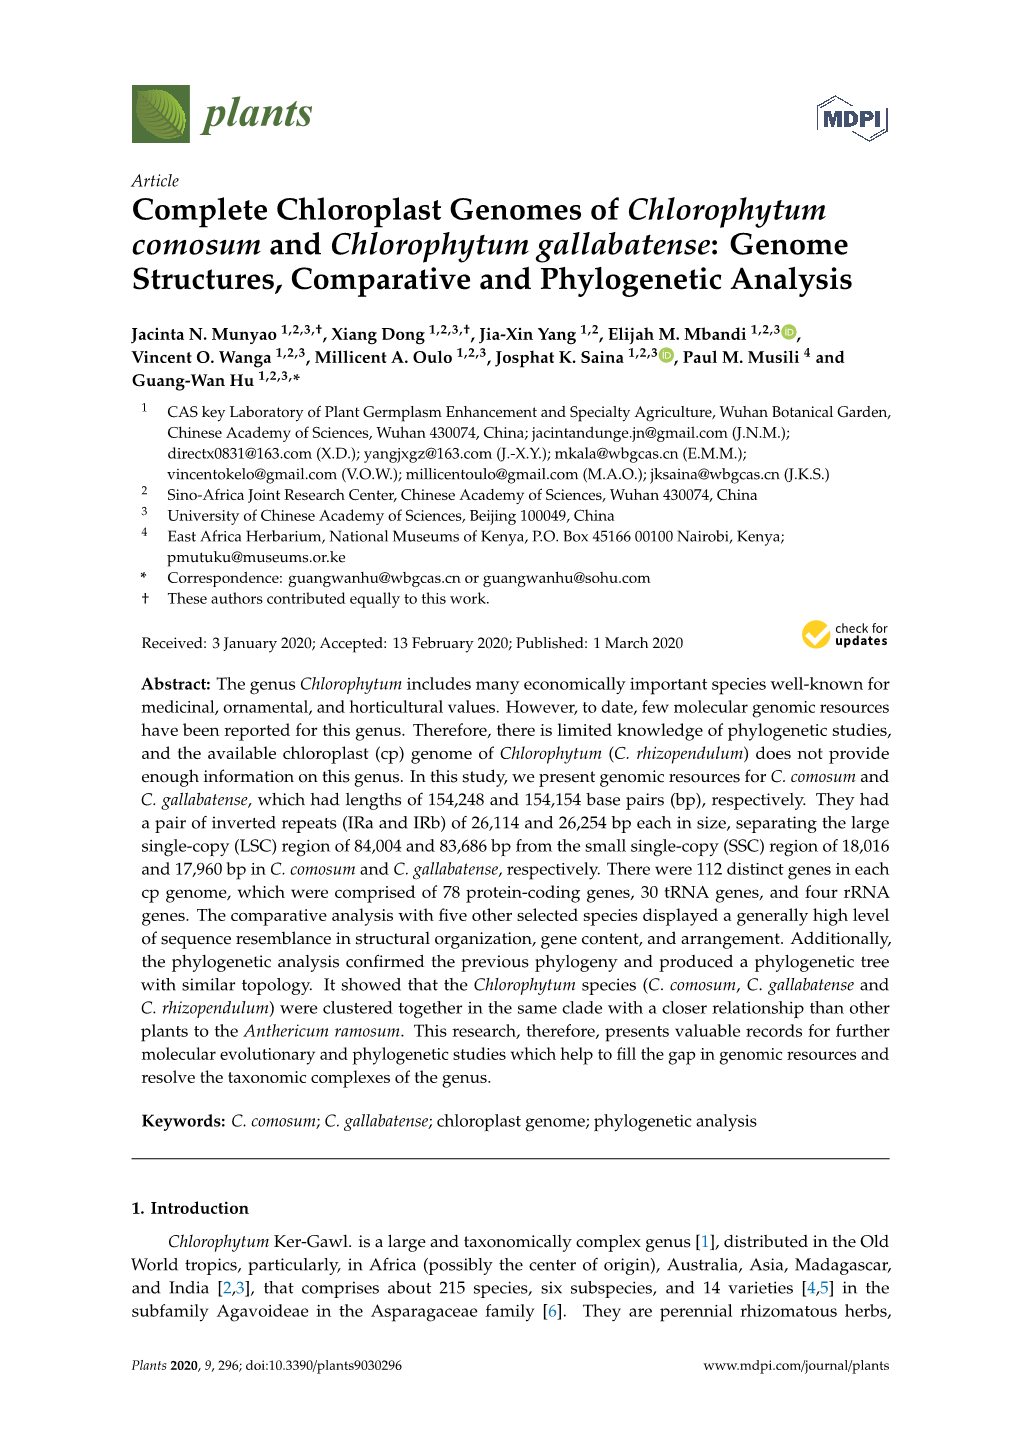 Complete Chloroplast Genomes of Chlorophytum Comosum and Chlorophytum Gallabatense: Genome Structures, Comparative and Phylogenetic Analysis